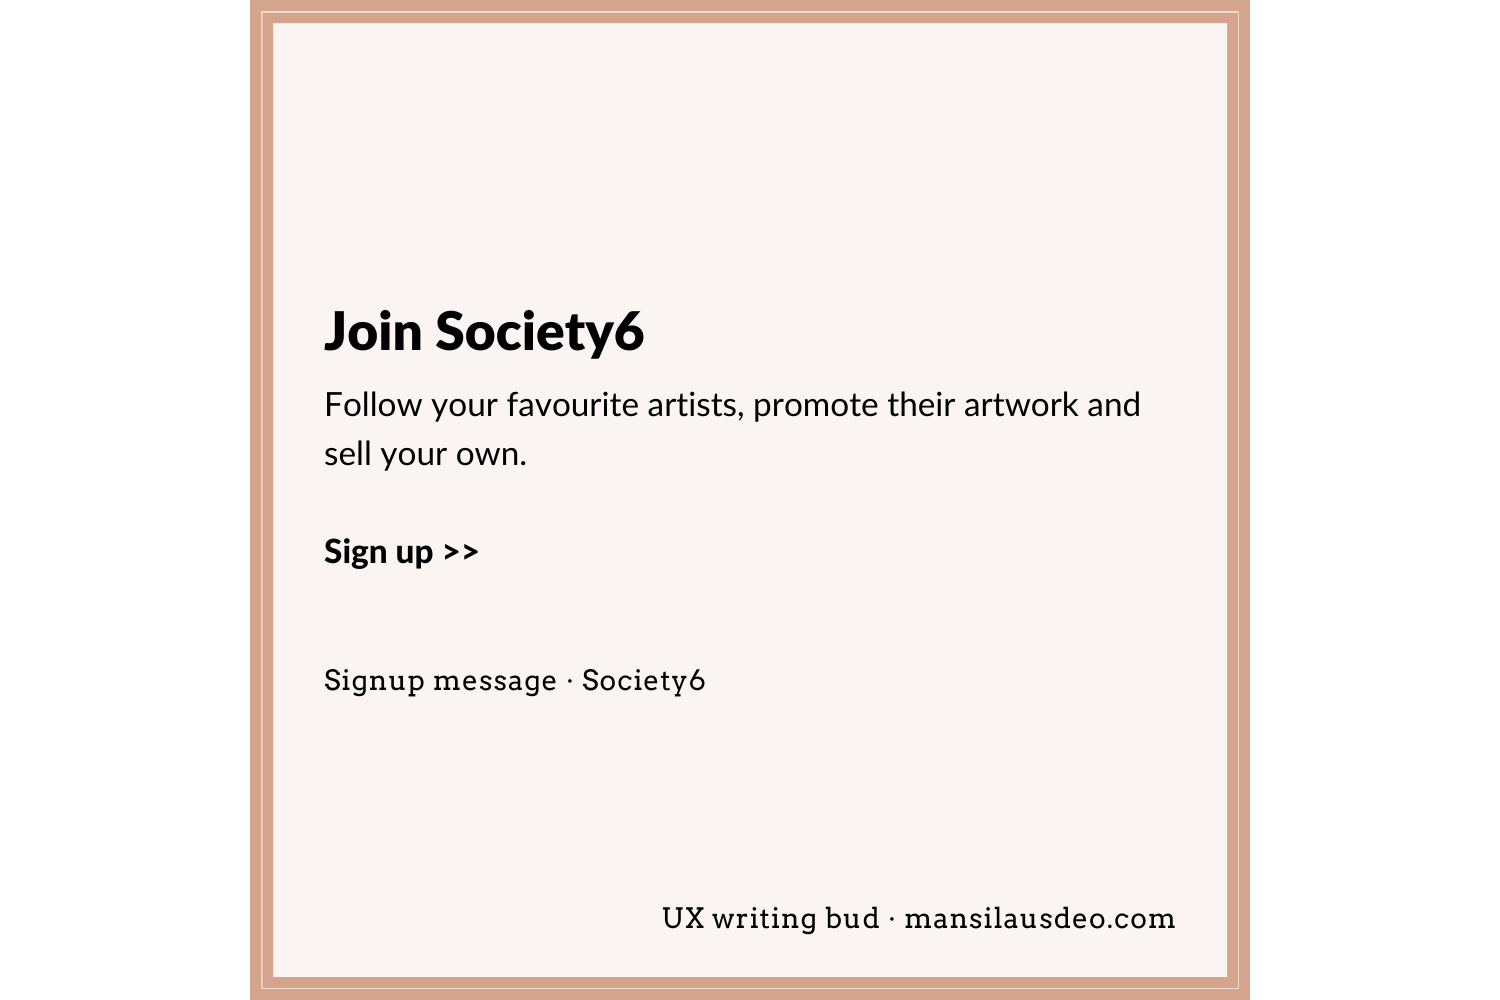 Join Society6 Follow your favourite artists, promote their artwork and sell your own. Sign up >> Signup form • Society6 UX writing bud